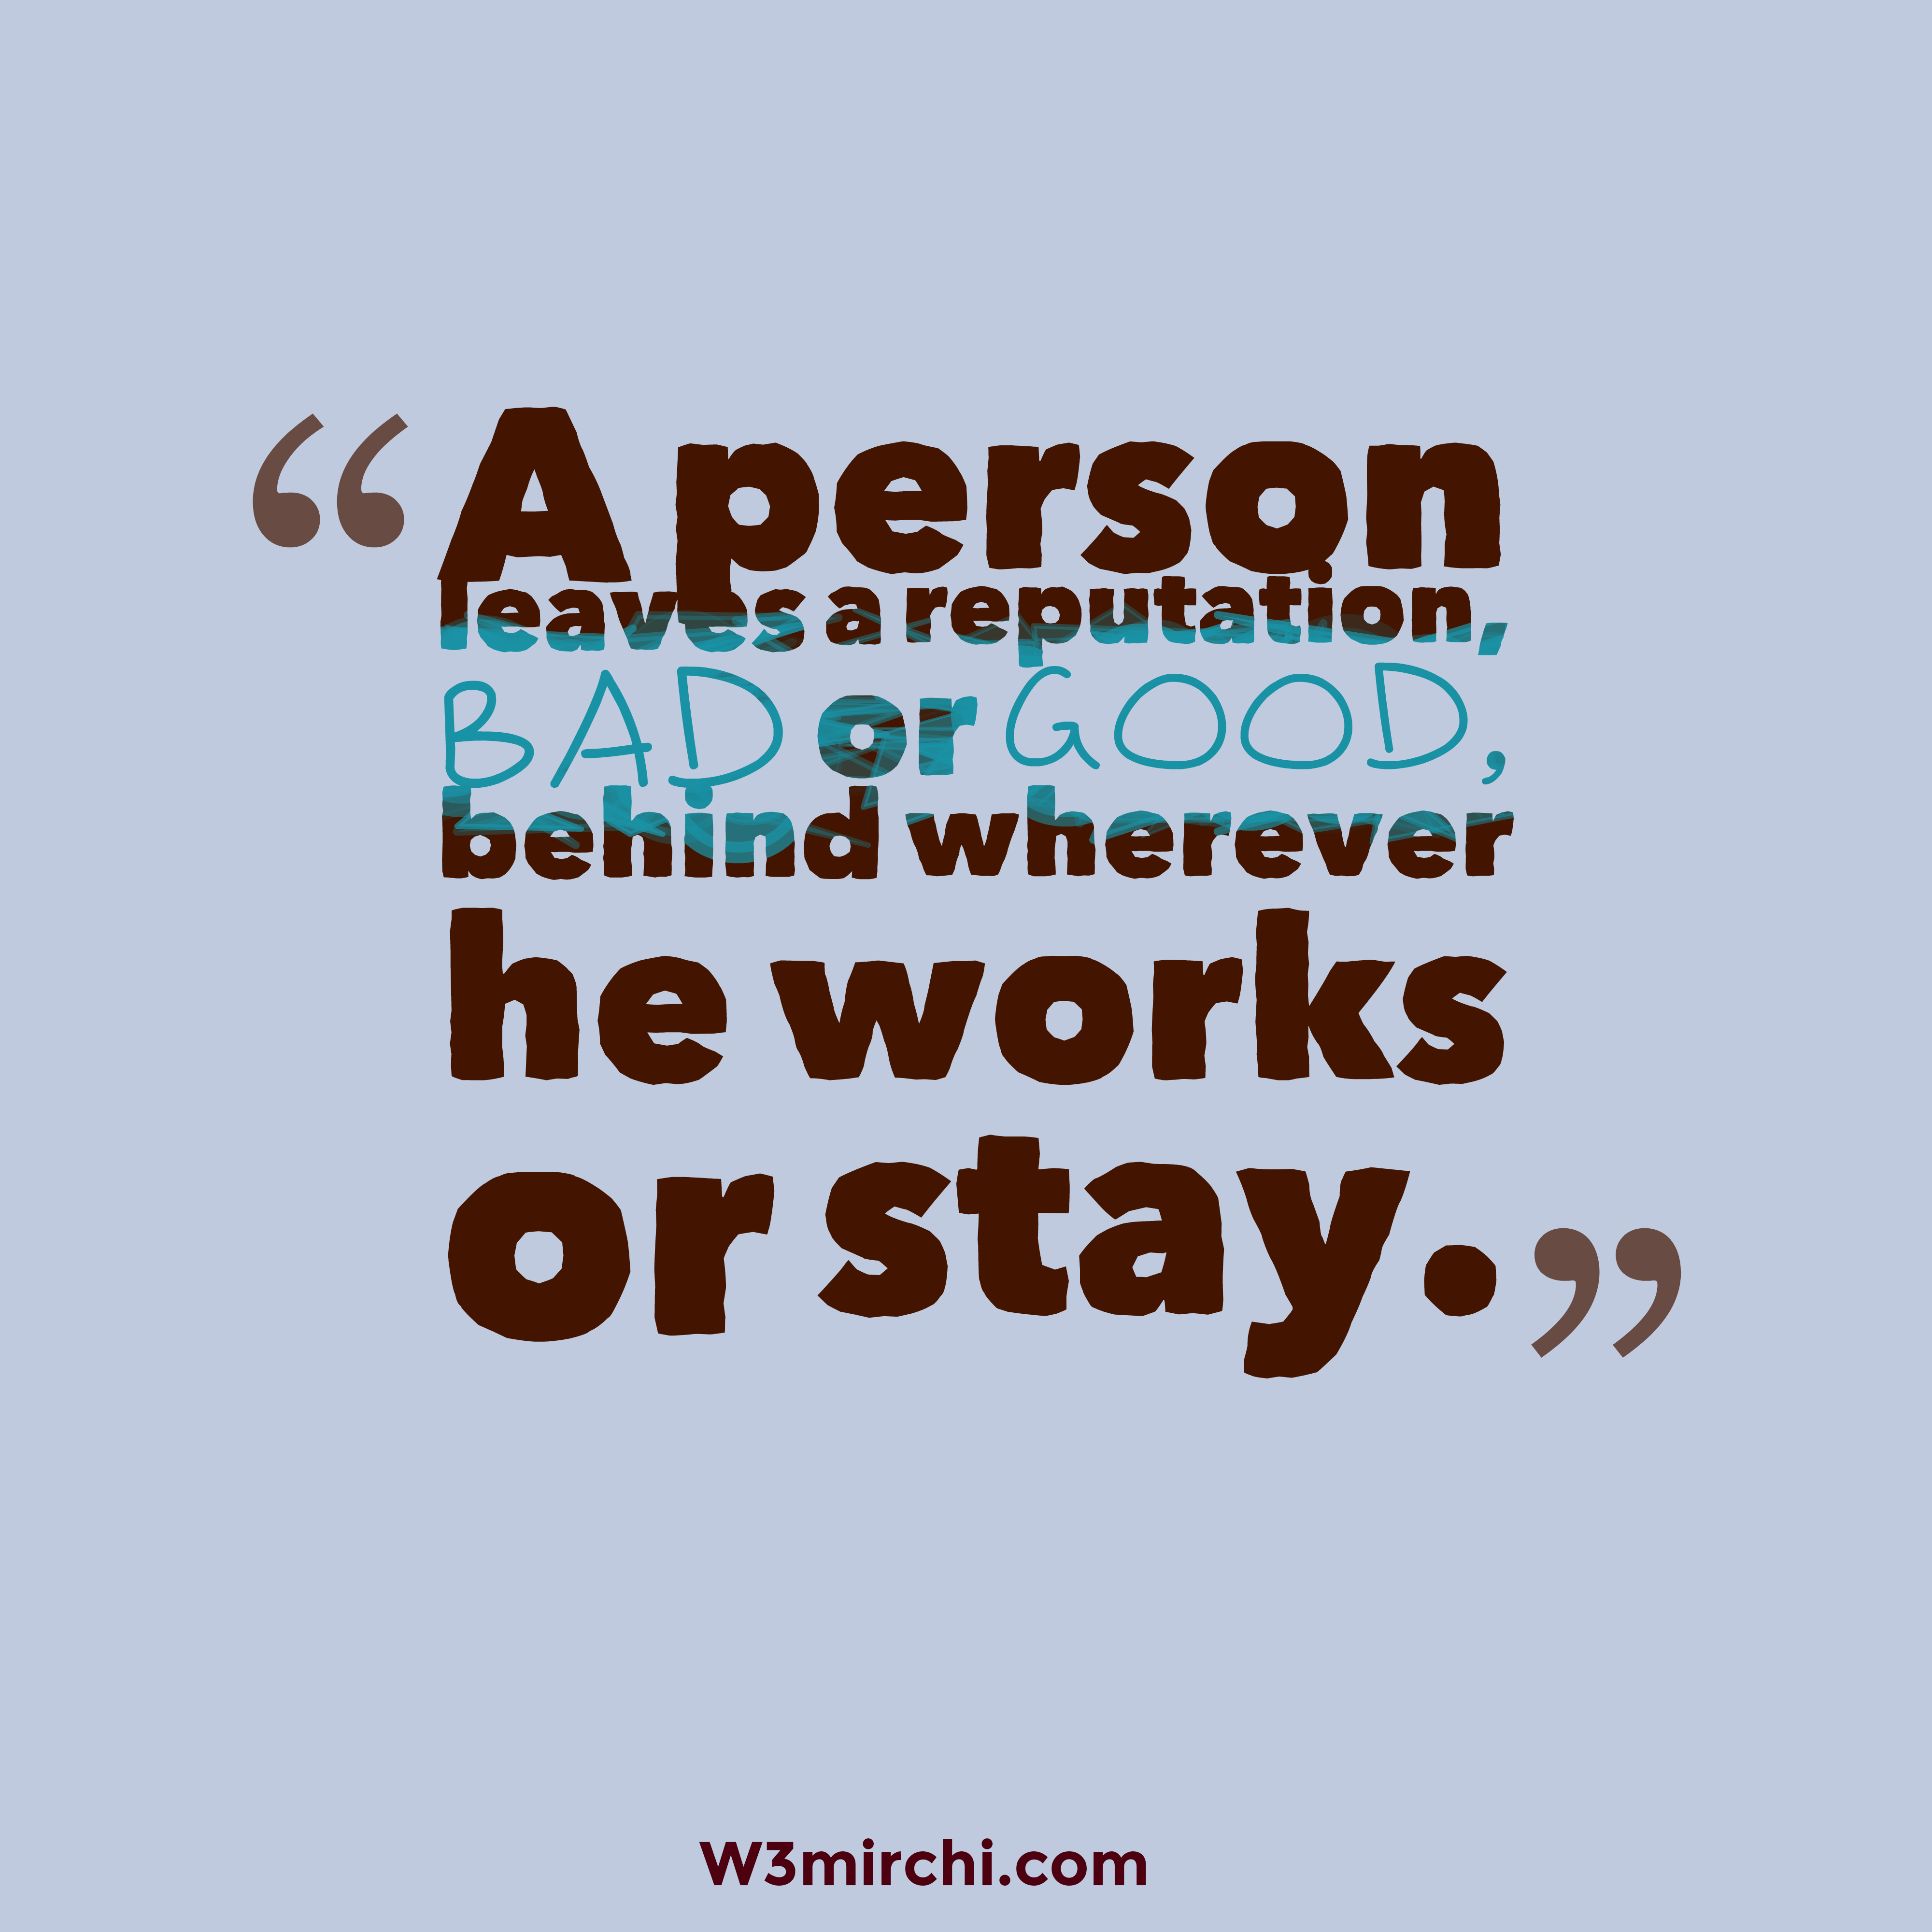 A person leaves a reputation, bad or good,